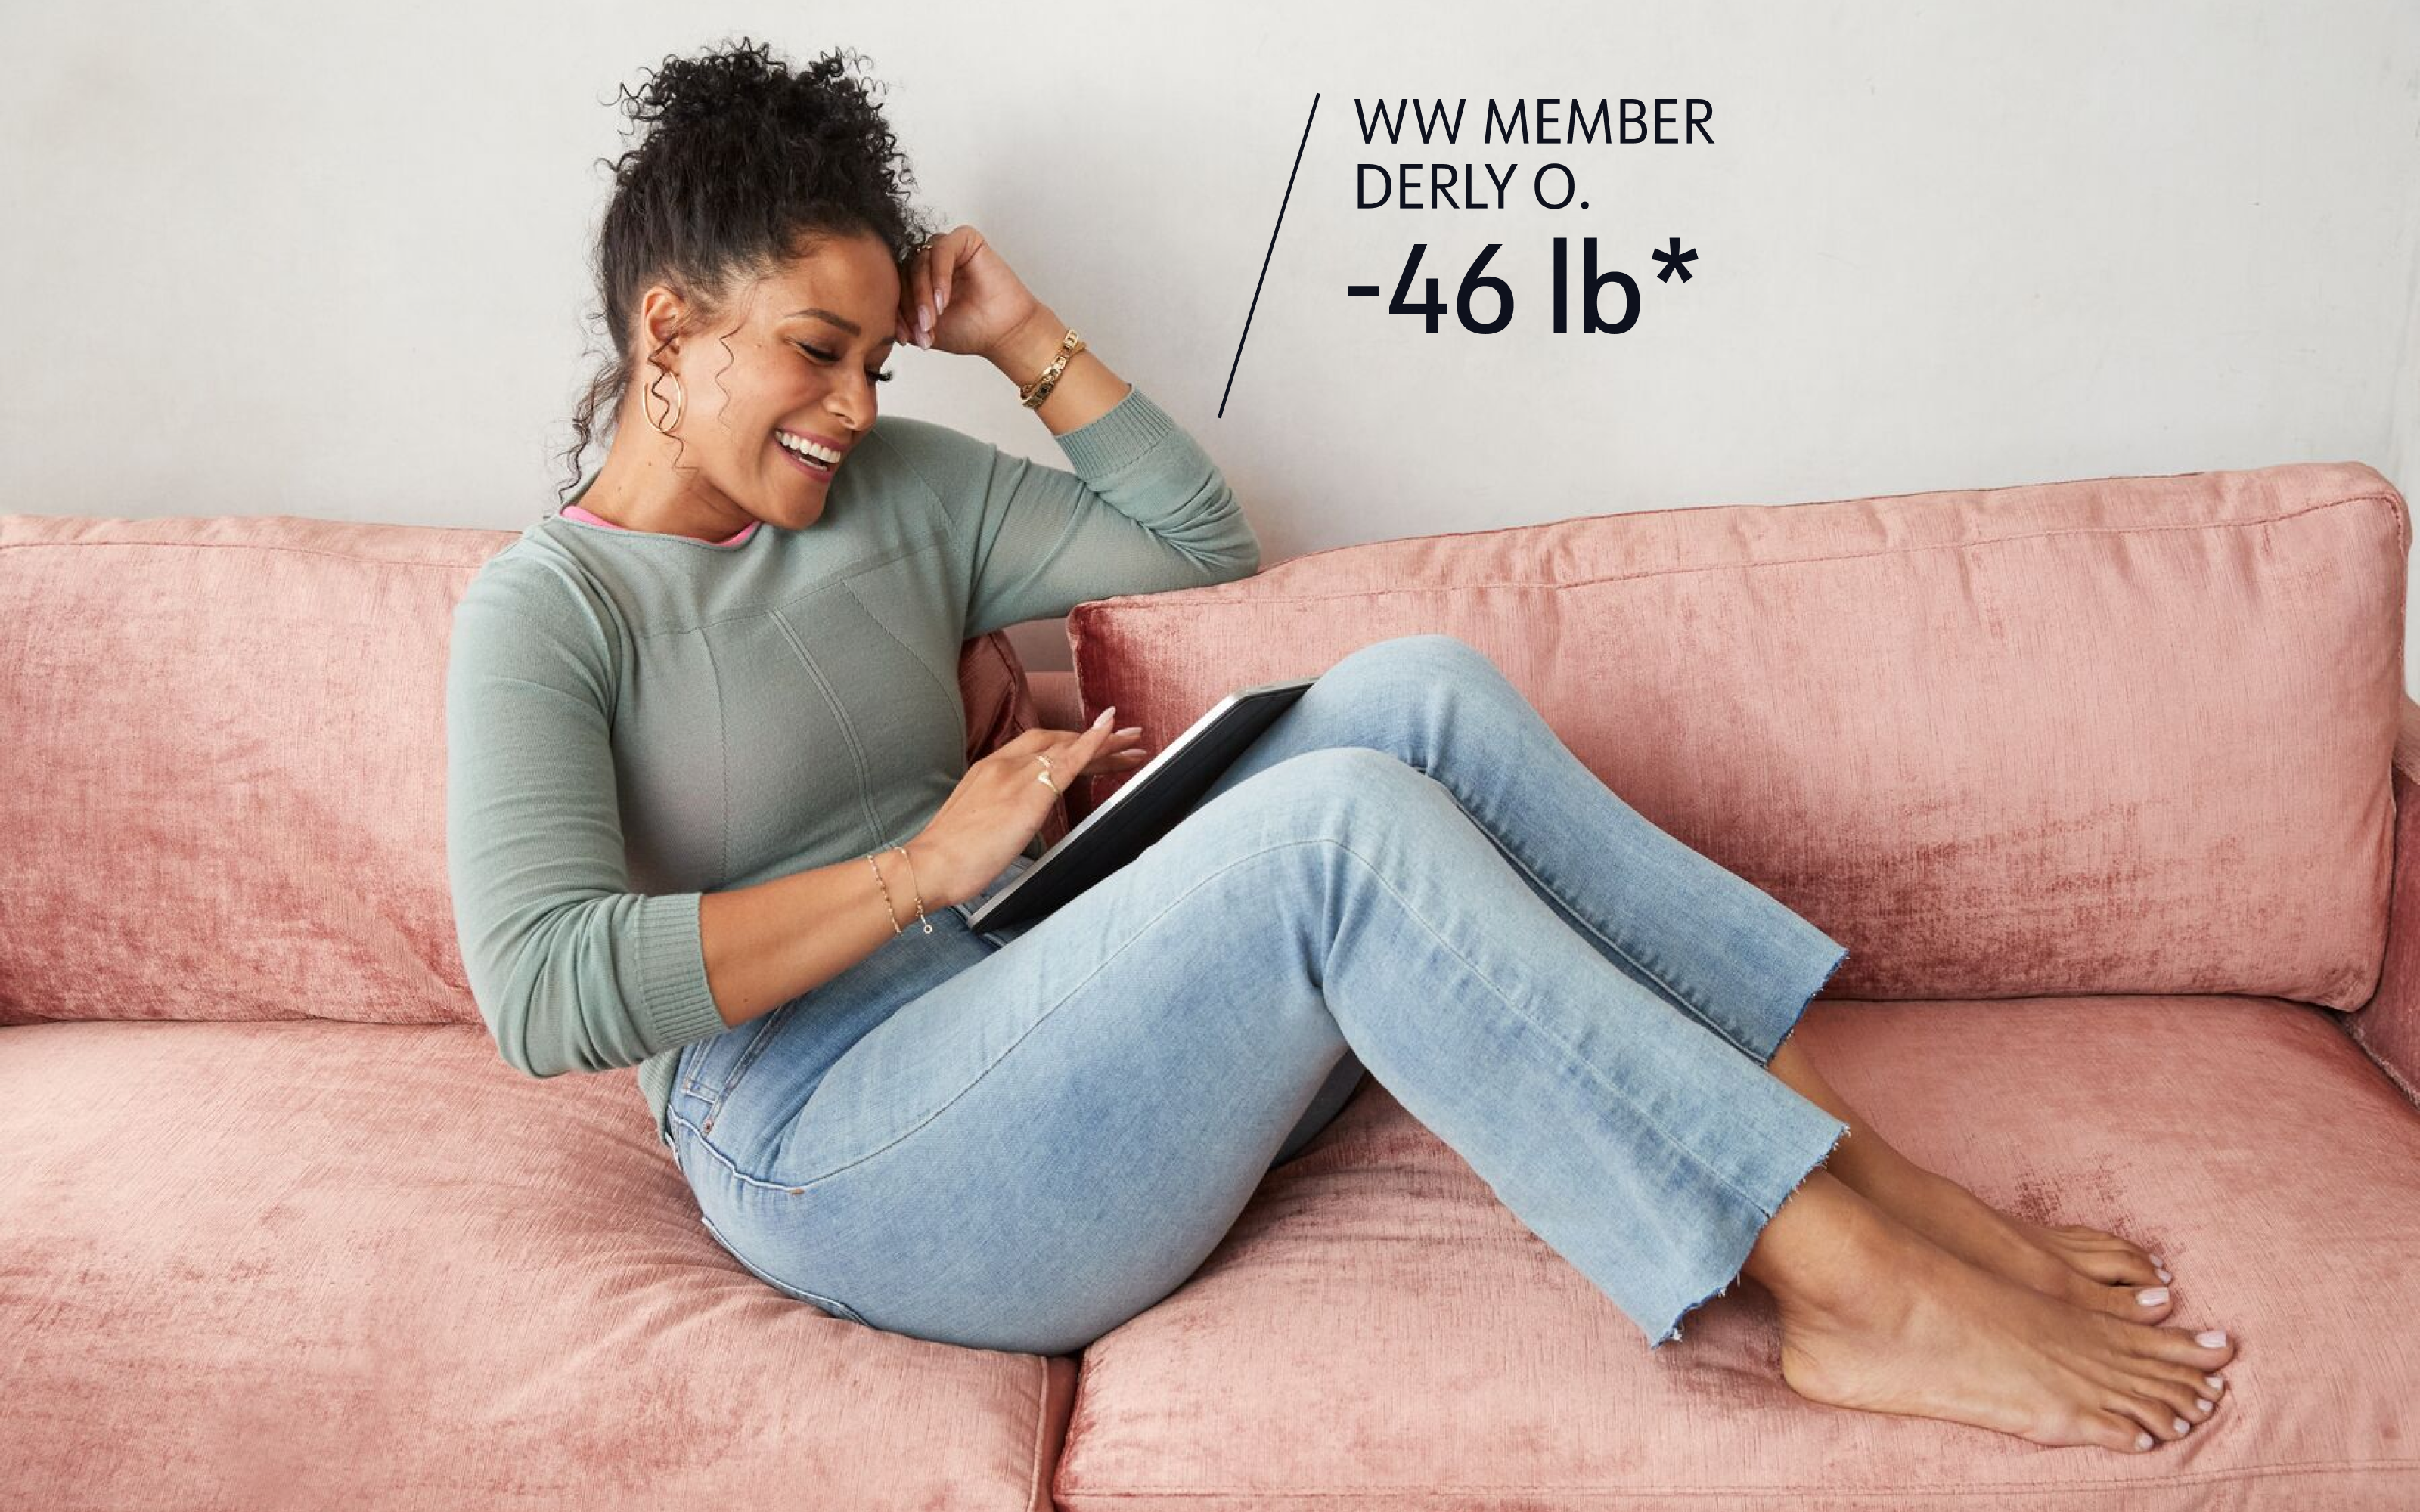 WW member Derly O. has lost 46 pounds. She is relaxing on a couch and looking at her tablet device.